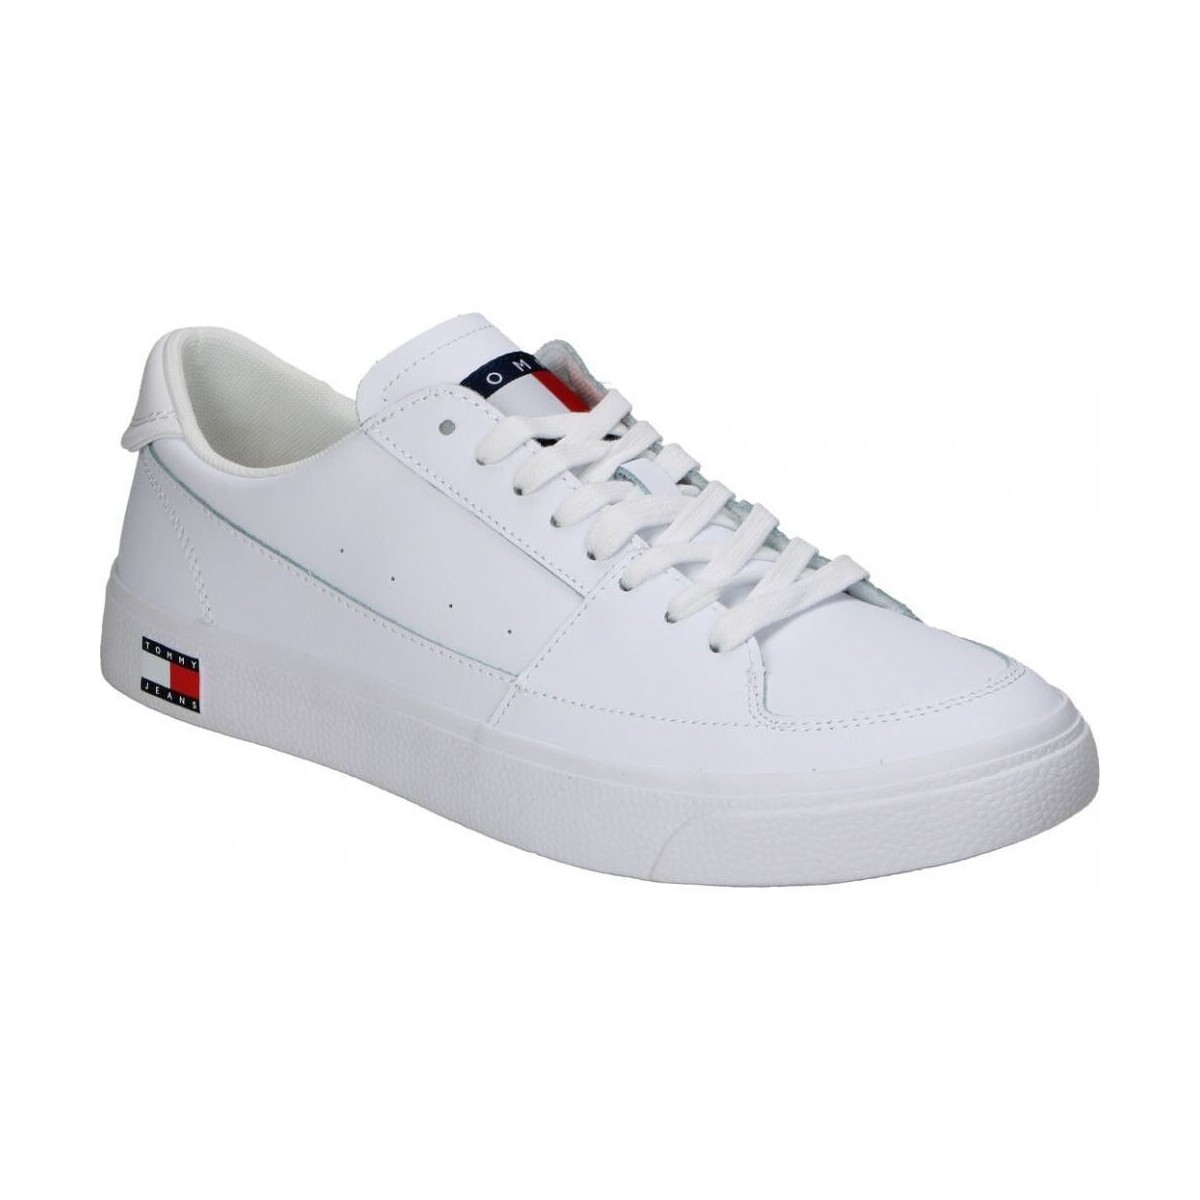 Chaussures Homme Multisport Tommy Hilfiger 1398YBS Blanc